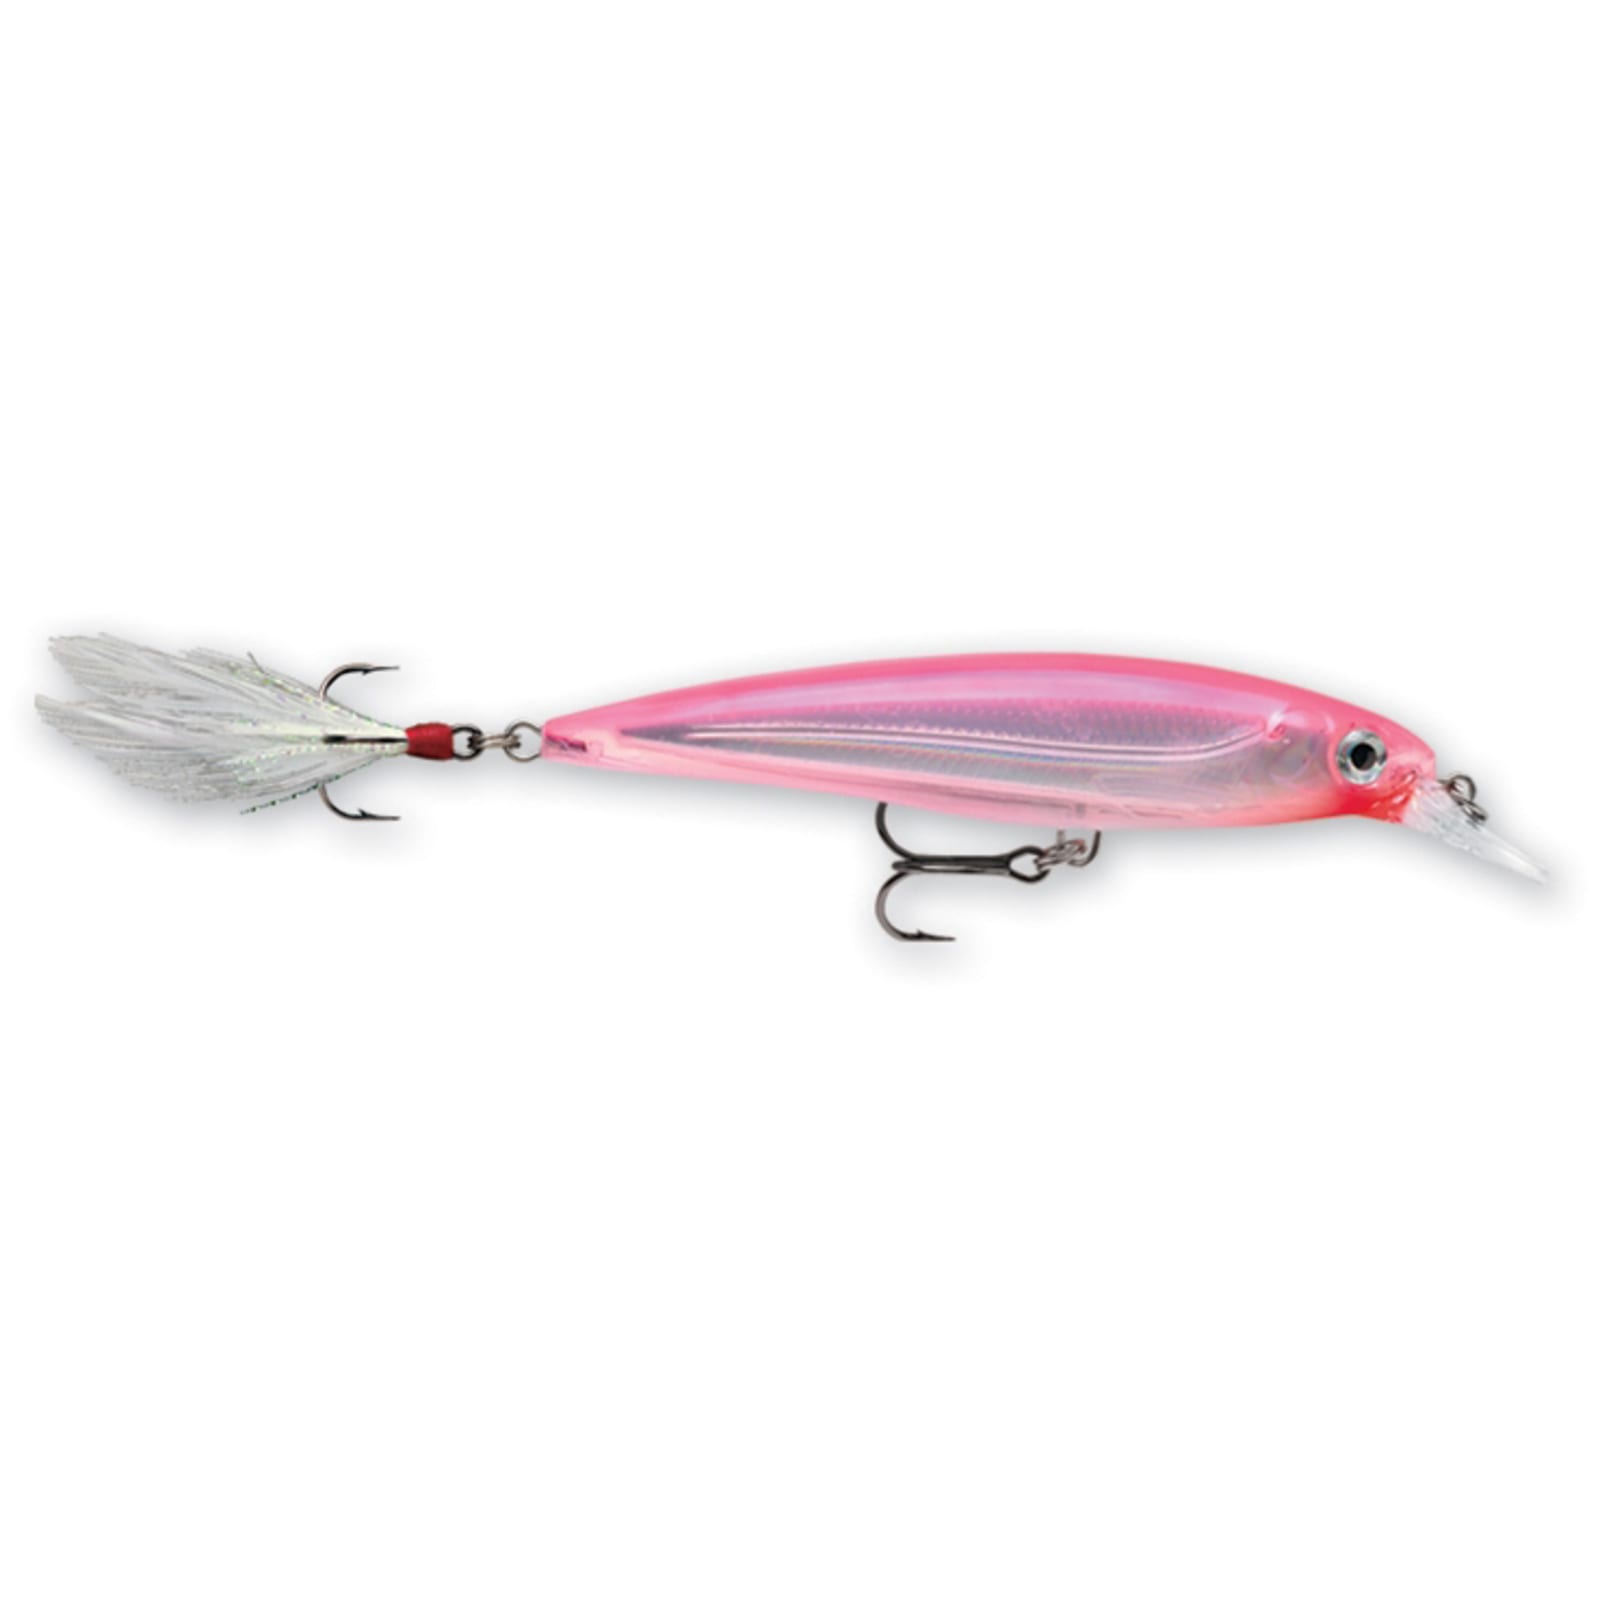 Replacement feathered treble hooks for Rapala XR04 - Hard Baits -   - Tackle Building Forums